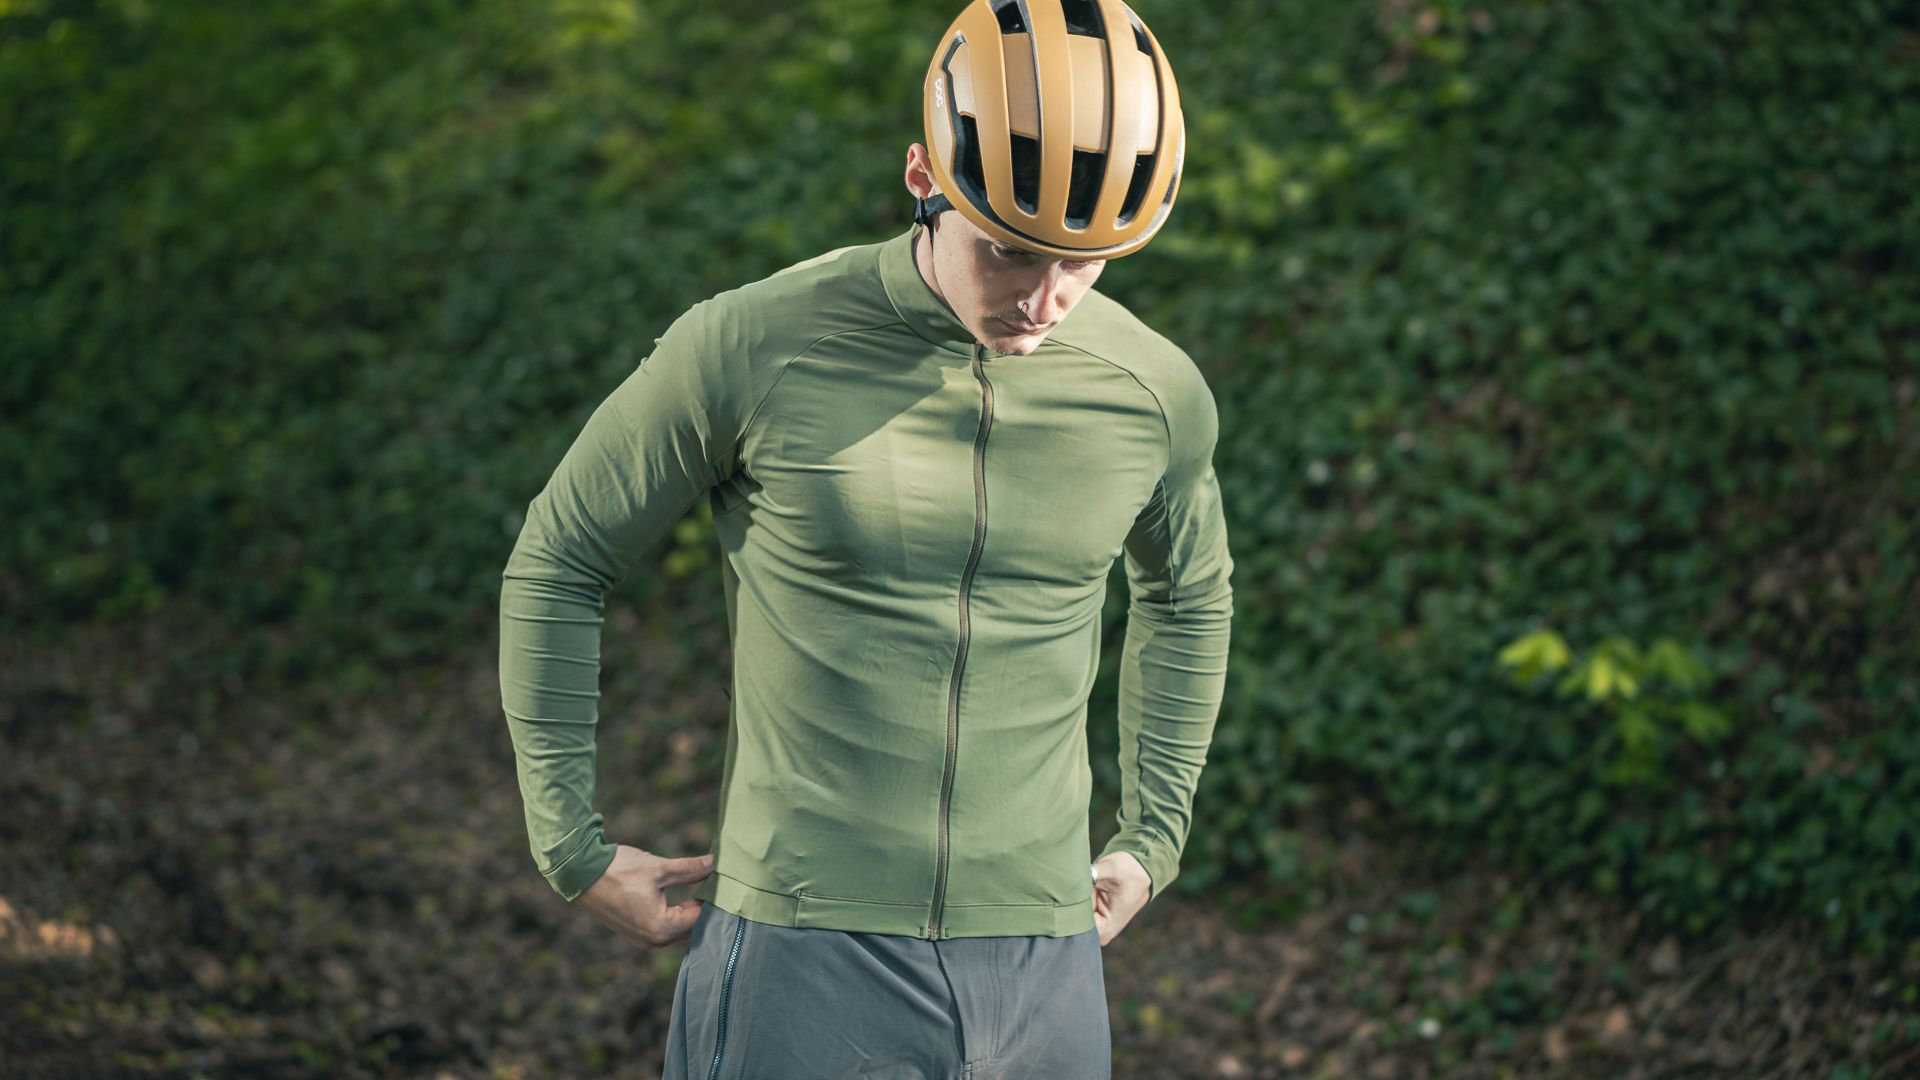 POC Ambient Thermal jersey review – a quality long…